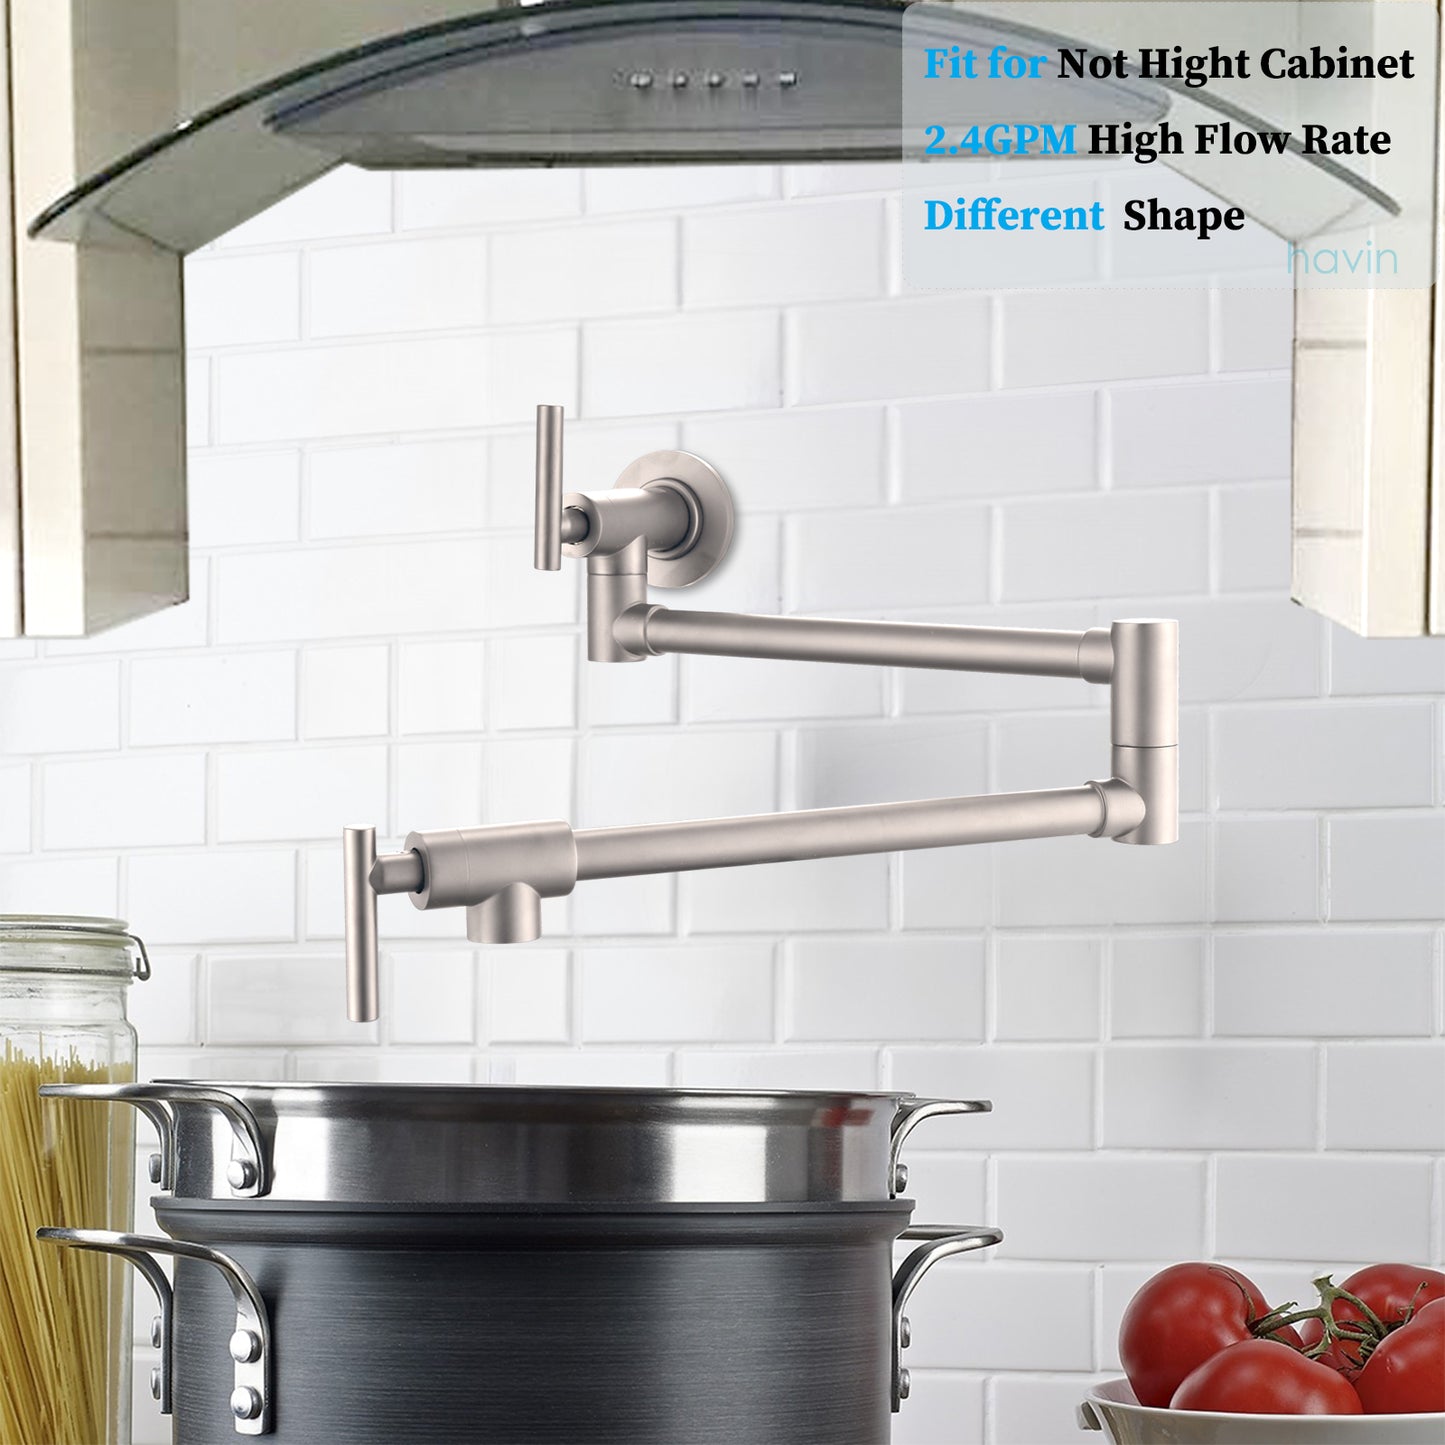 Model: CM02-Customized -Havin A202 Pot filler faucet wall mount, (Style A Brushed Nickel)